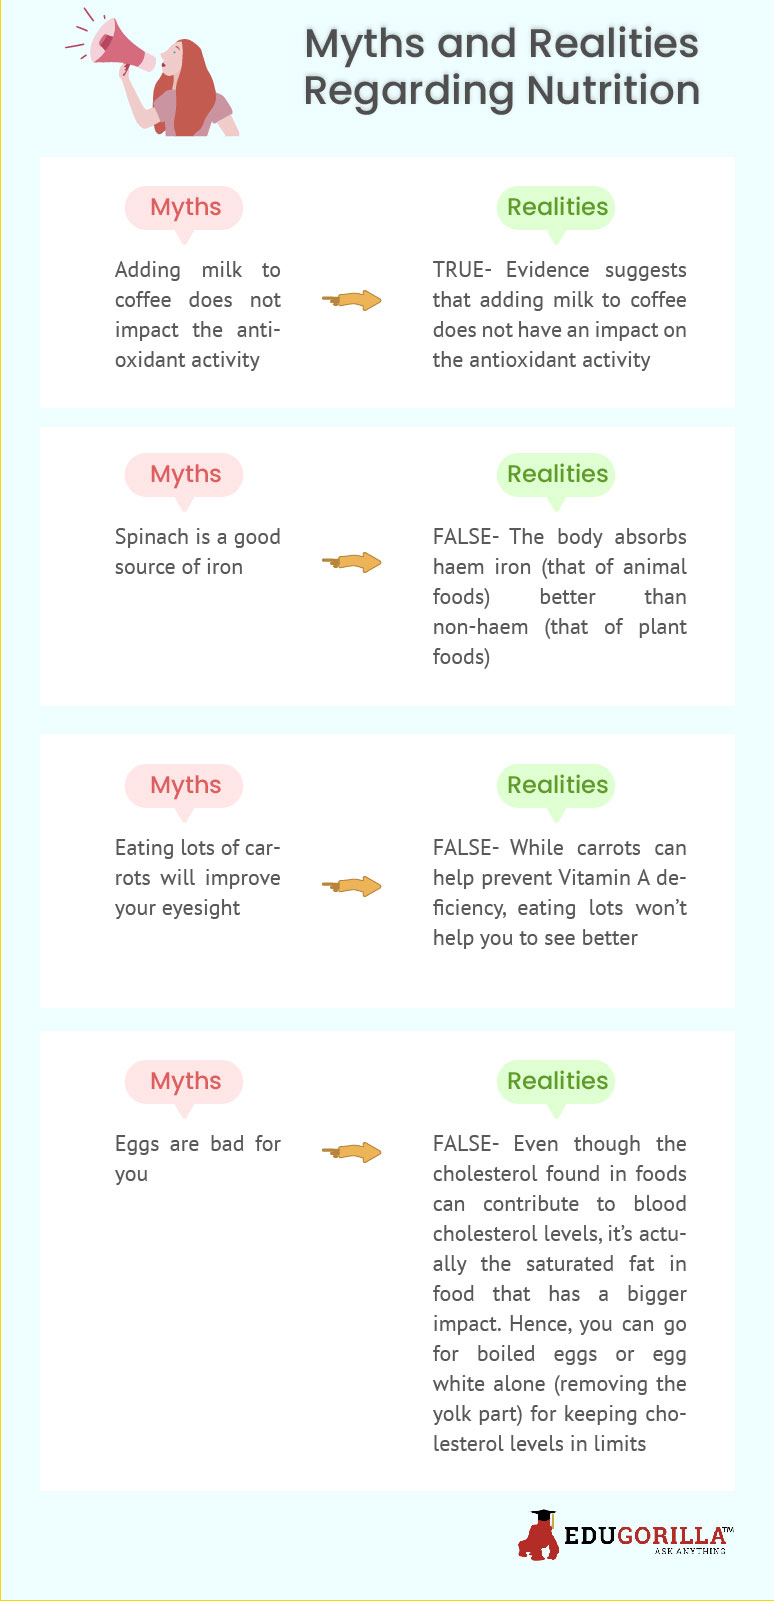 Myths and Realities Regarding Nutrition